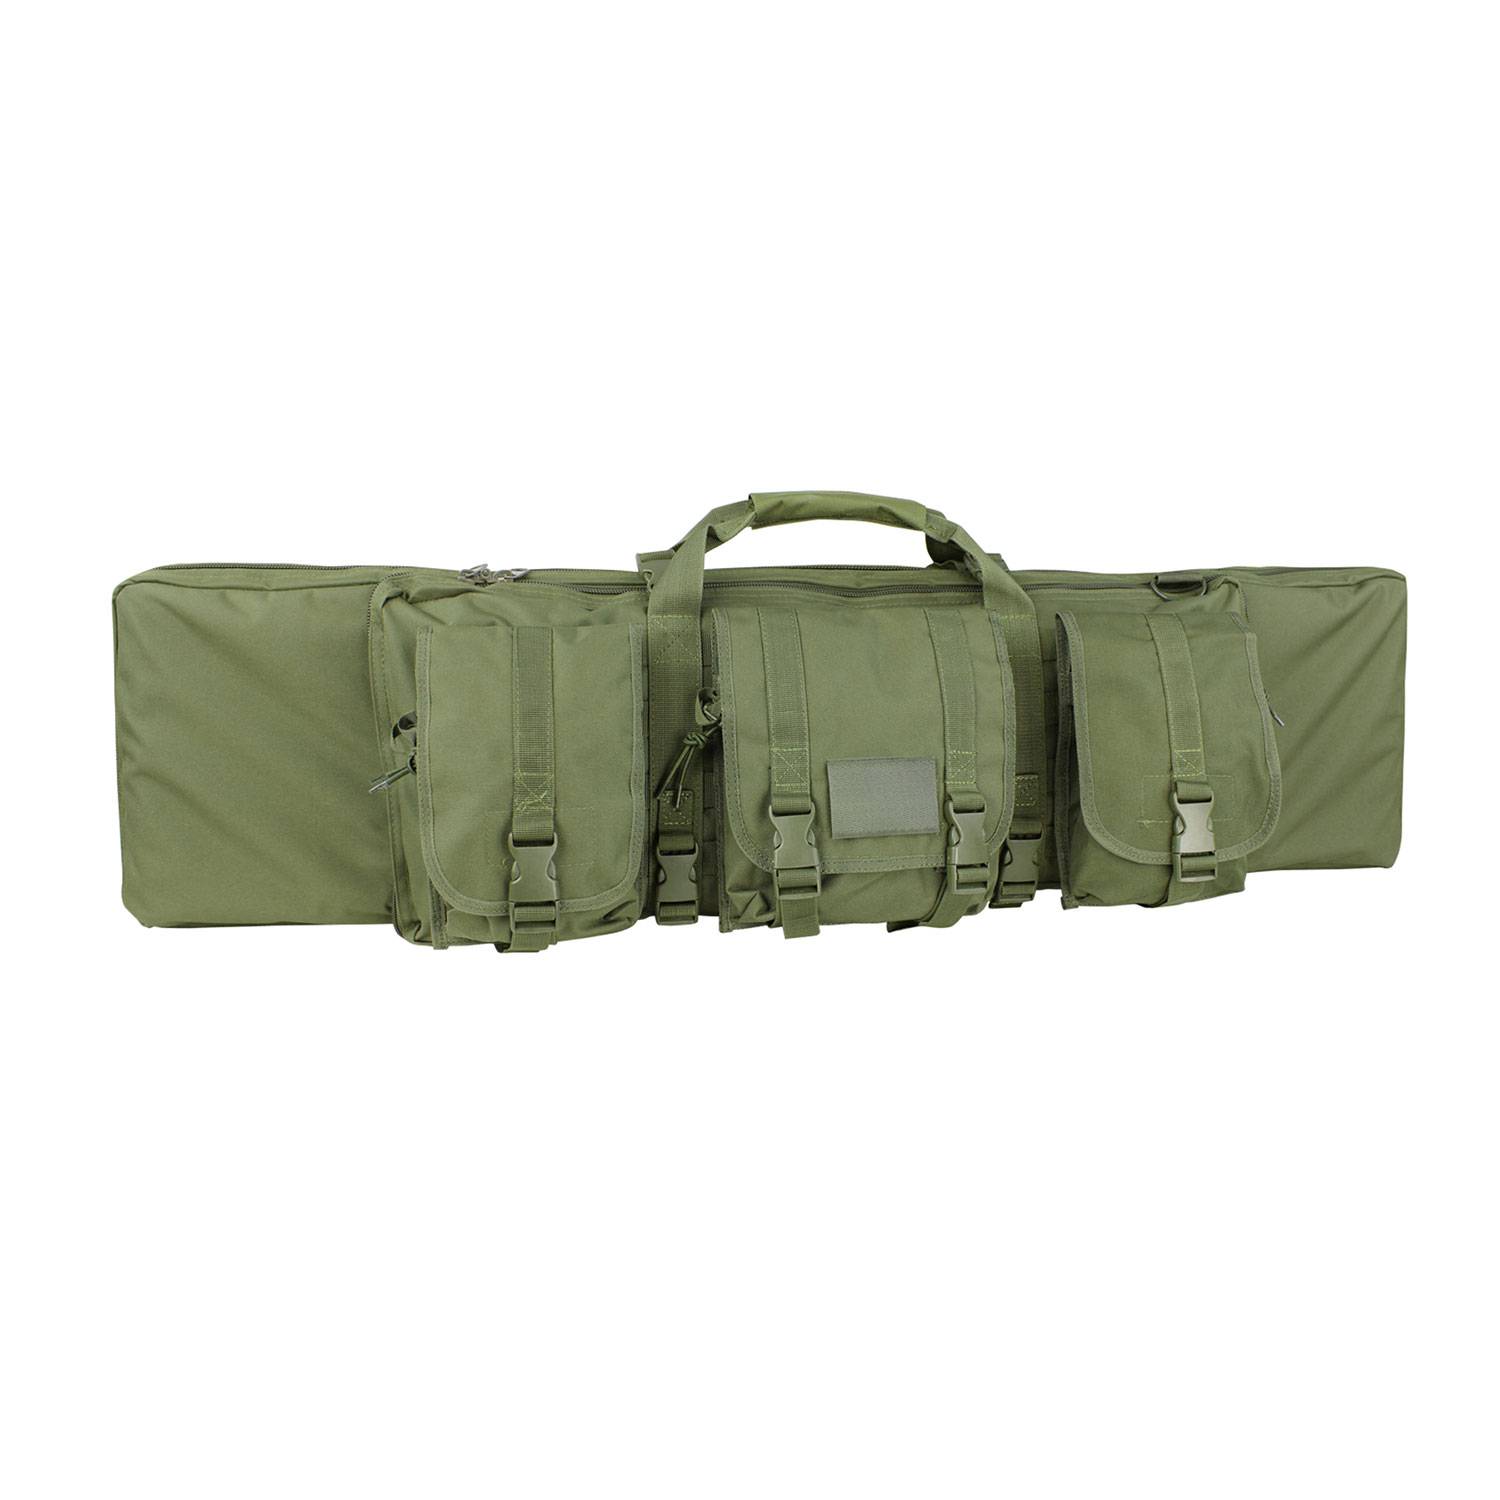 CONDOR SOFT SIDED MOLLE RIFLE CASE